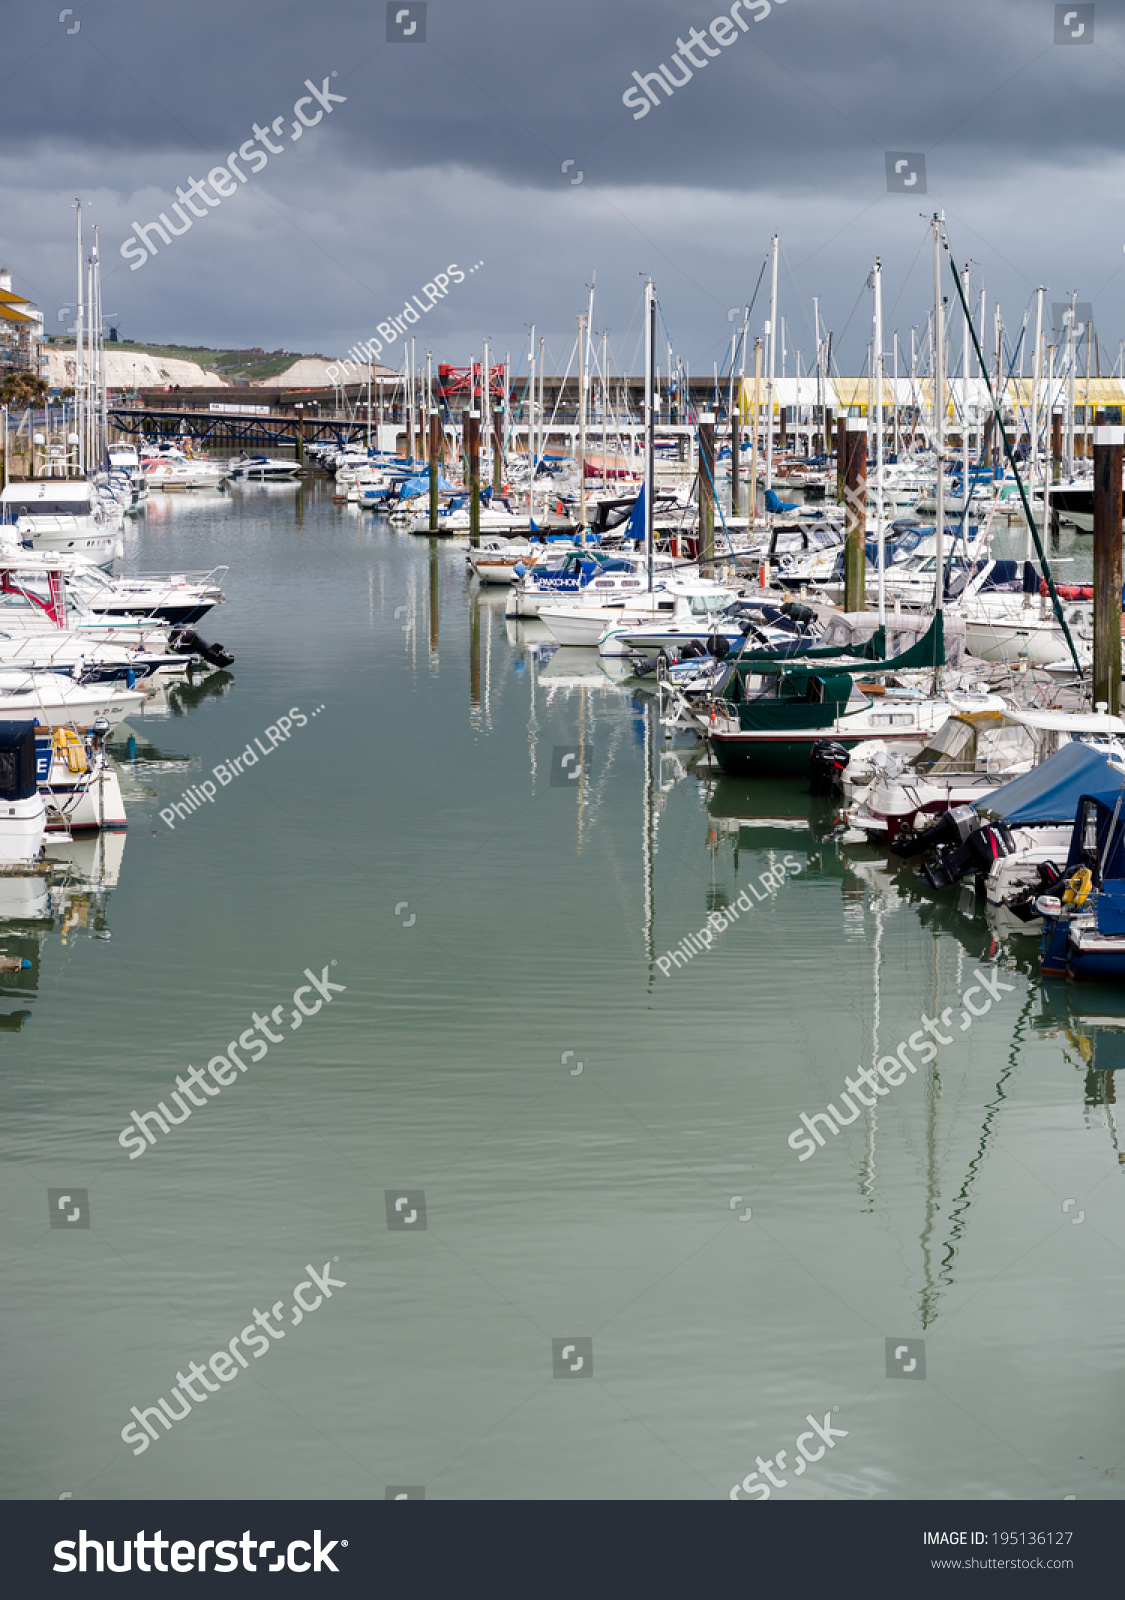 BRIGHTON, SUSSEX/UK - MAY 24 : View of Brighton Marina in Brighton on May 24, 2014. Unidentified people. #195136127